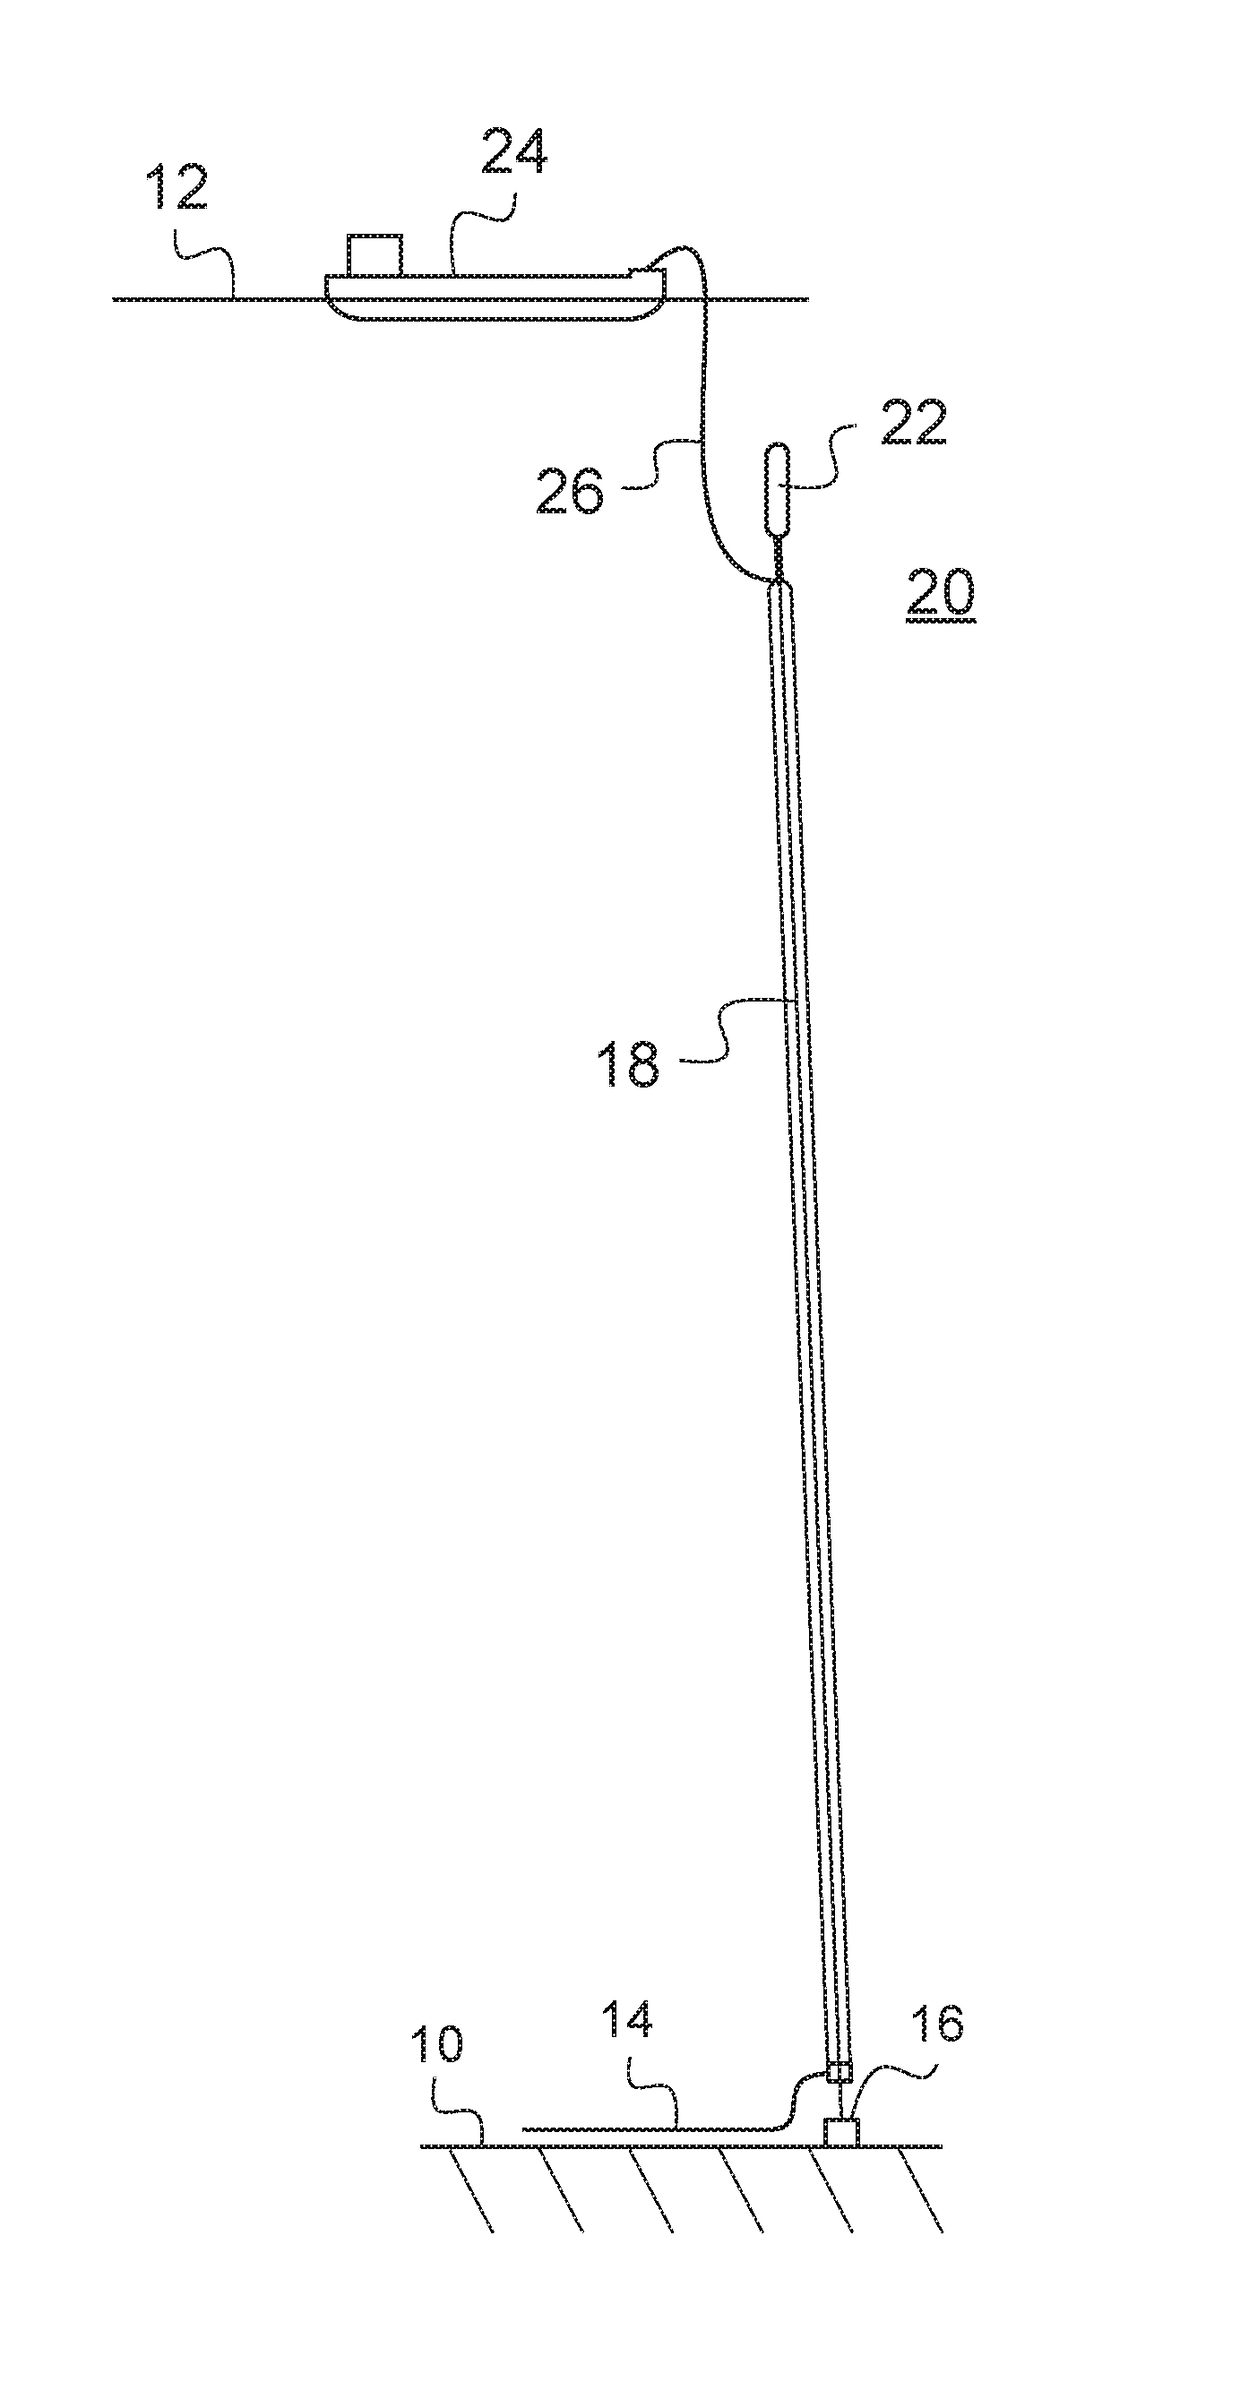 Method for connecting a bottom pipe and a riser pipe